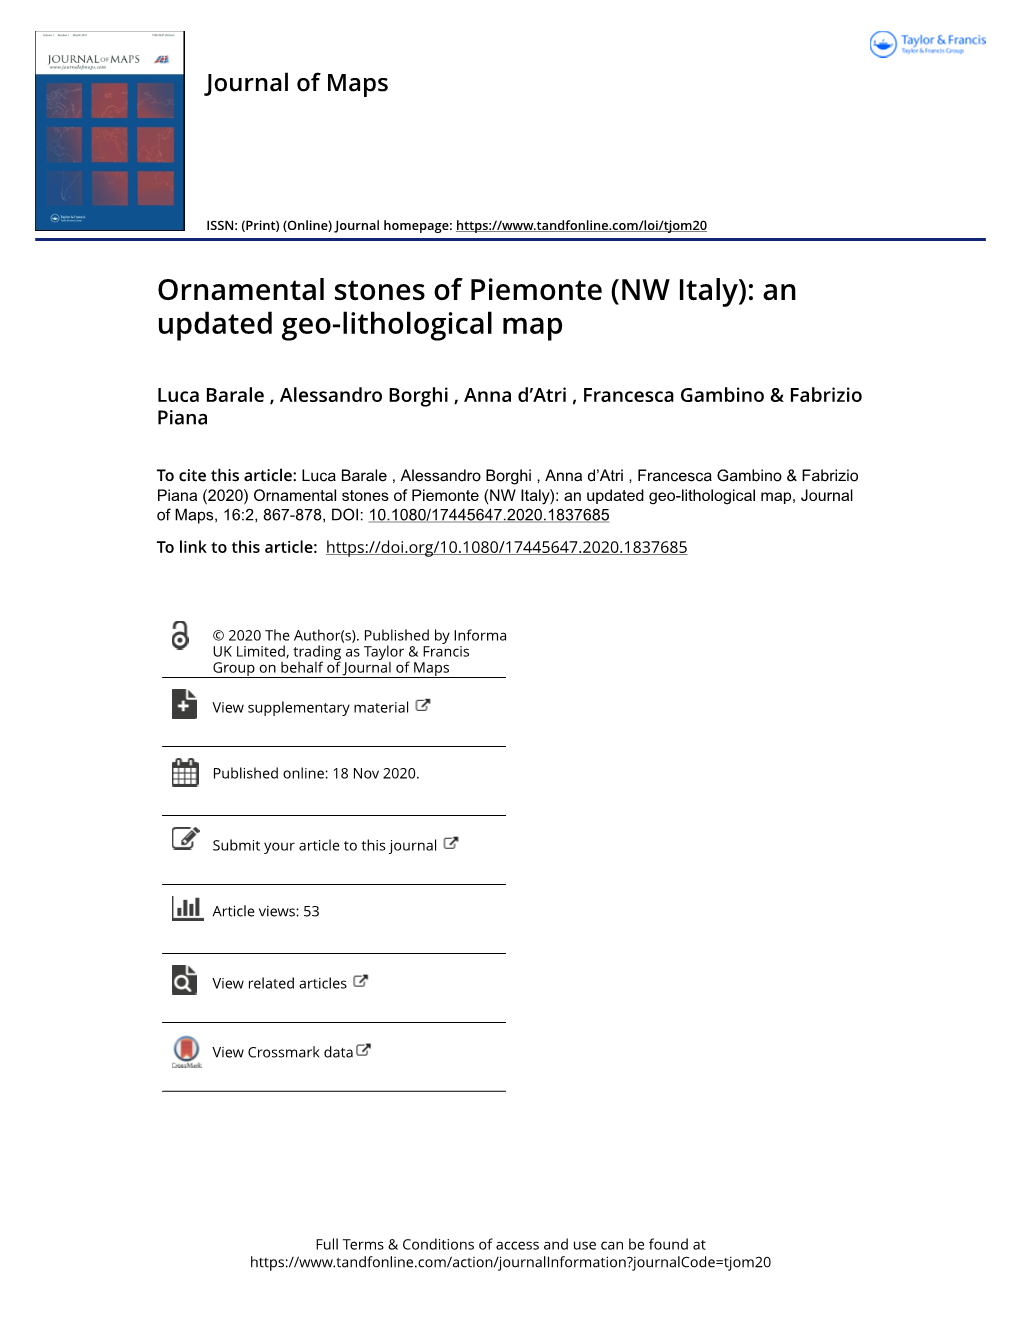 Ornamental Stones of Piemonte (NW Italy): an Updated Geo-Lithological Map